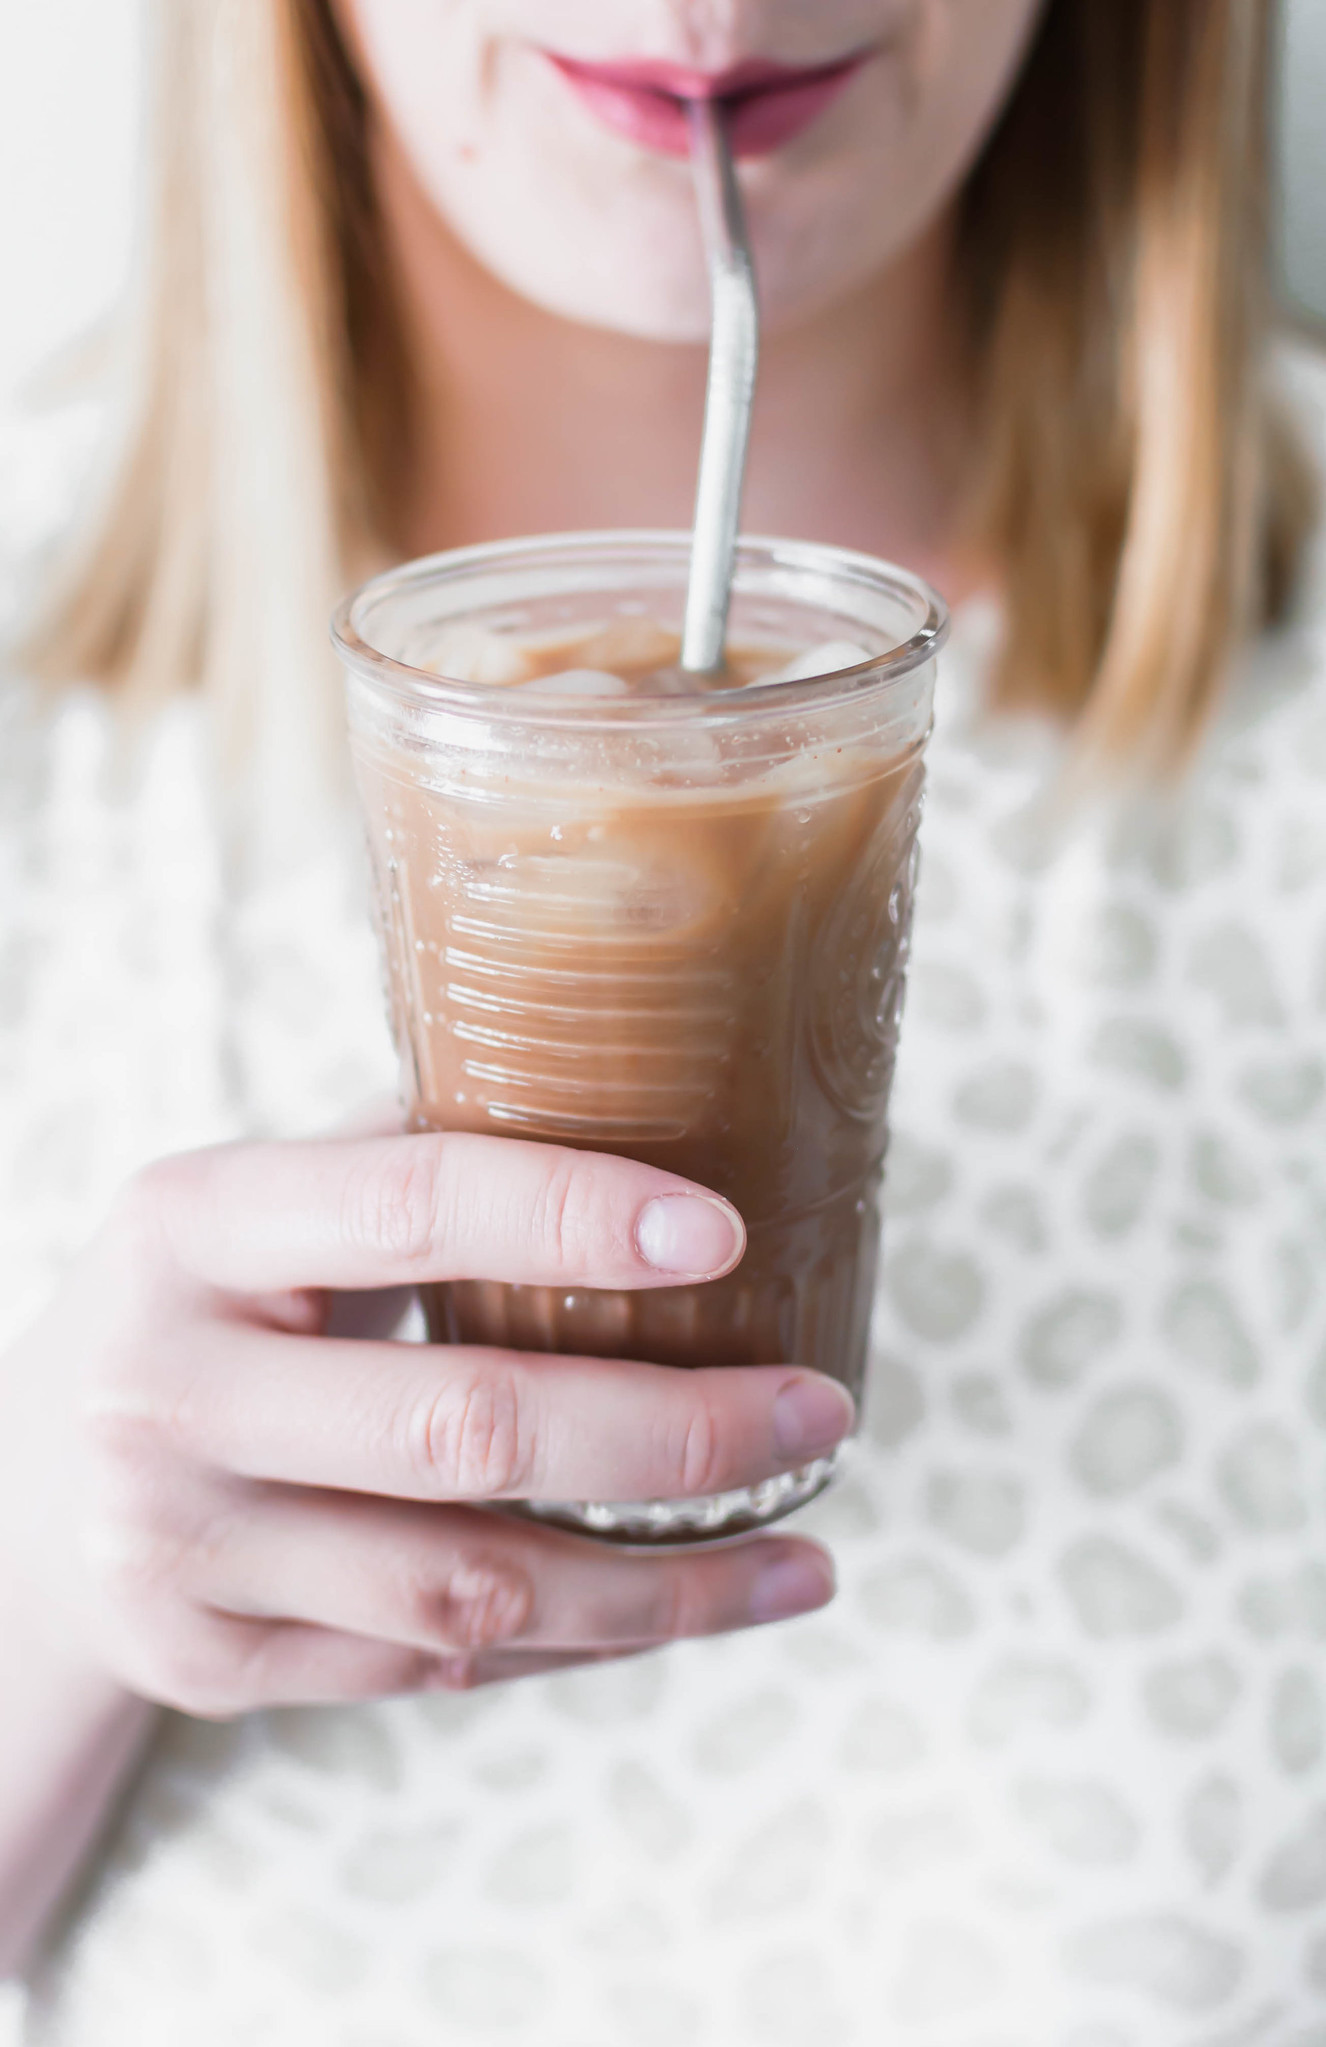 Missing your favorite coffee shop? Try making a classic at home with this Iced Mocha Recipe. Only three ingredients required!